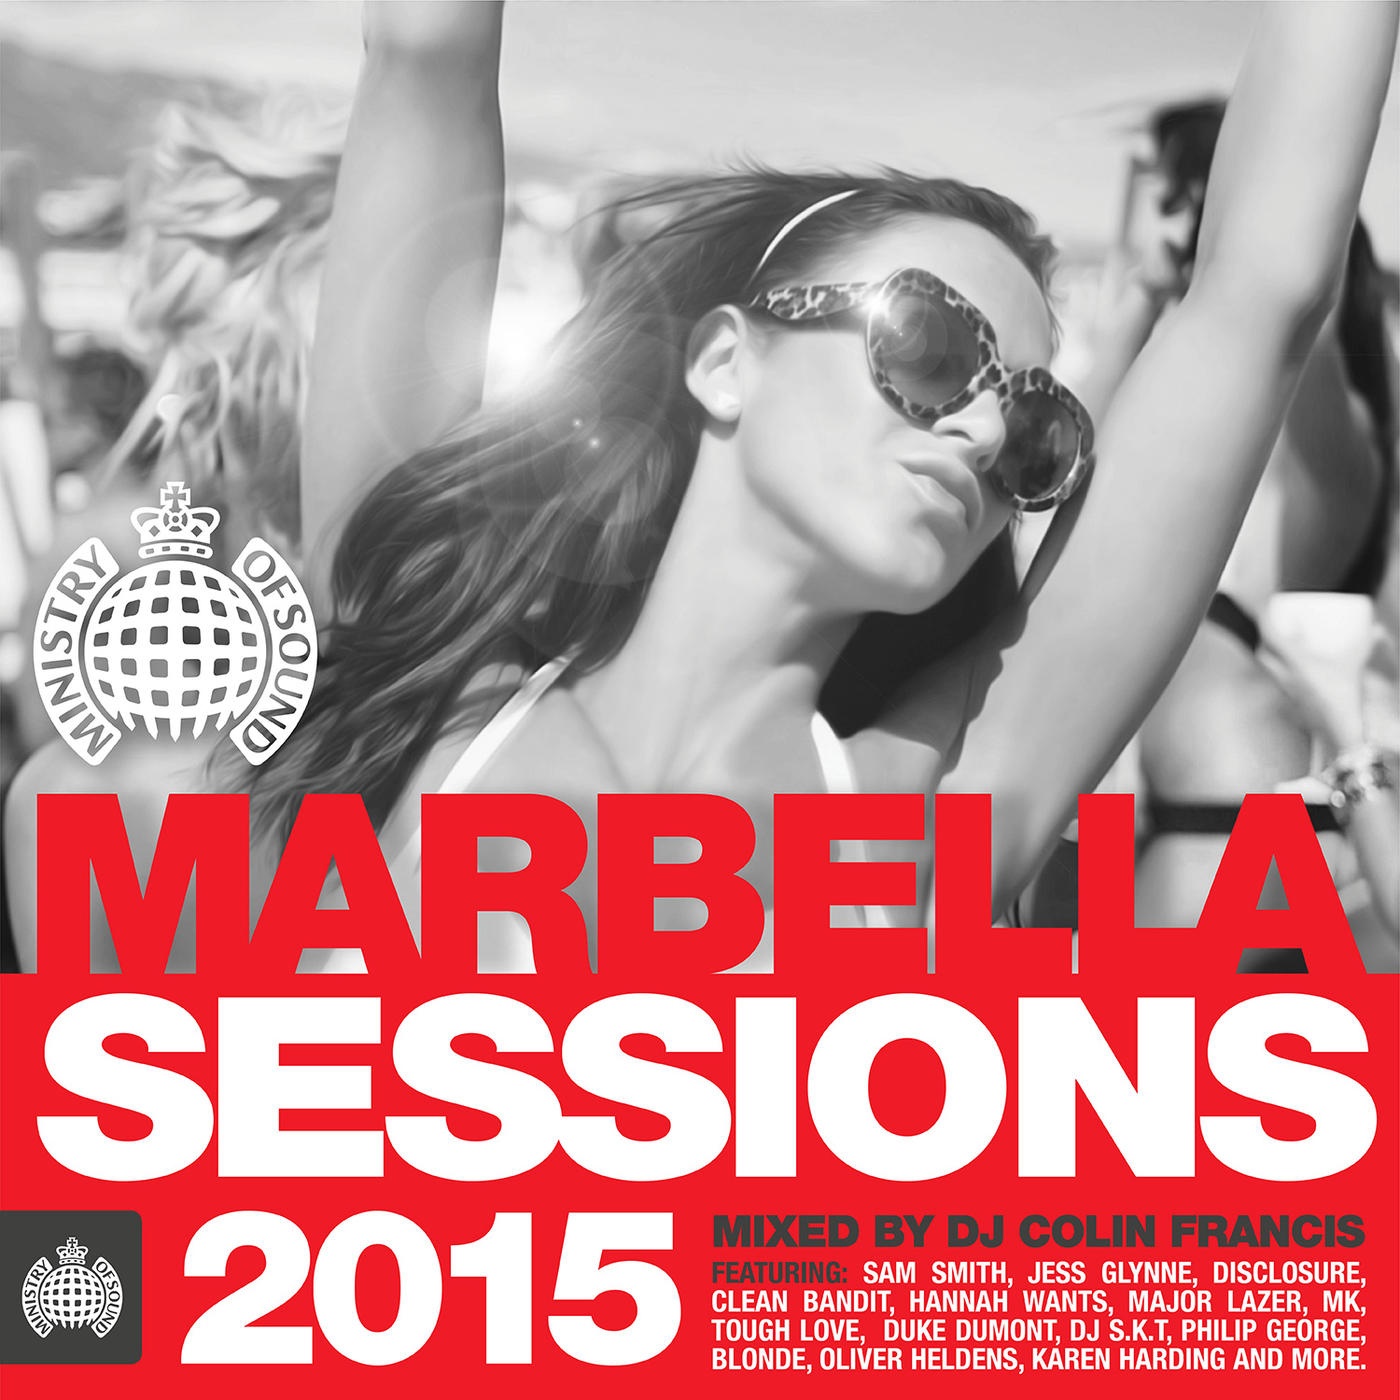 Marbella Sessions 2015 - Ministry of Sound